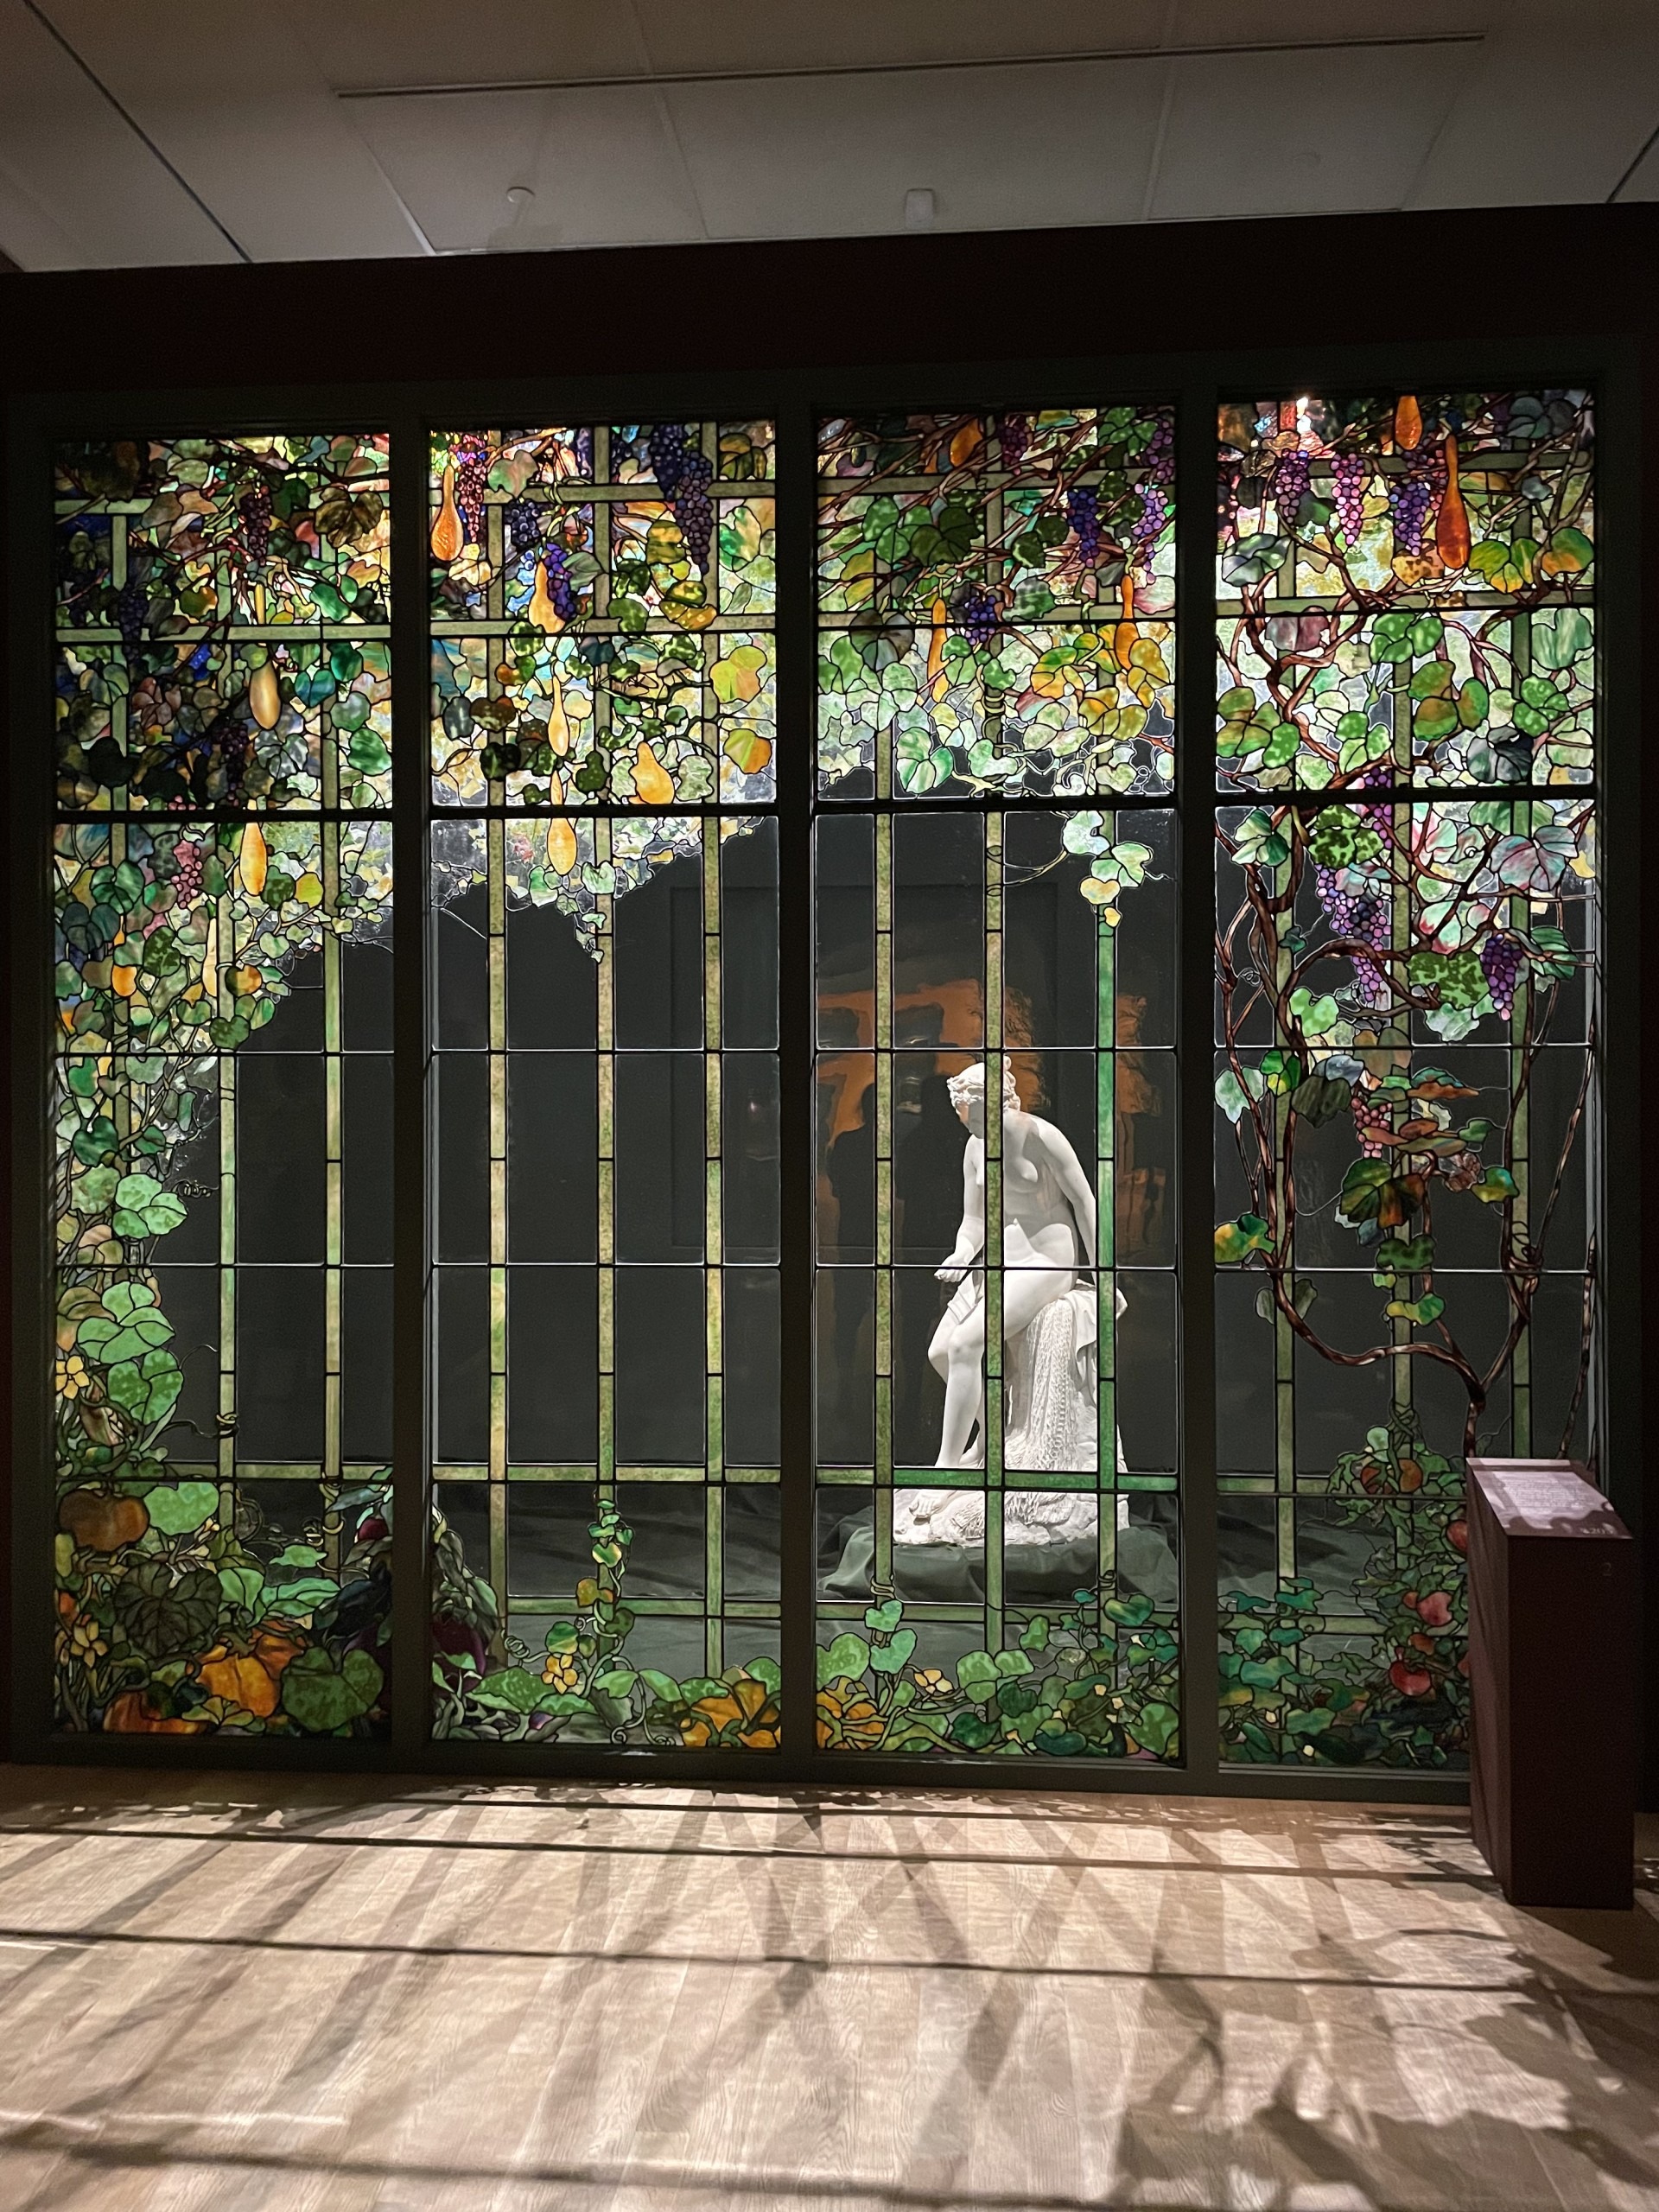 Louis Comfort Tiffany's Life and Art: Part 1 - Creative Pinellas